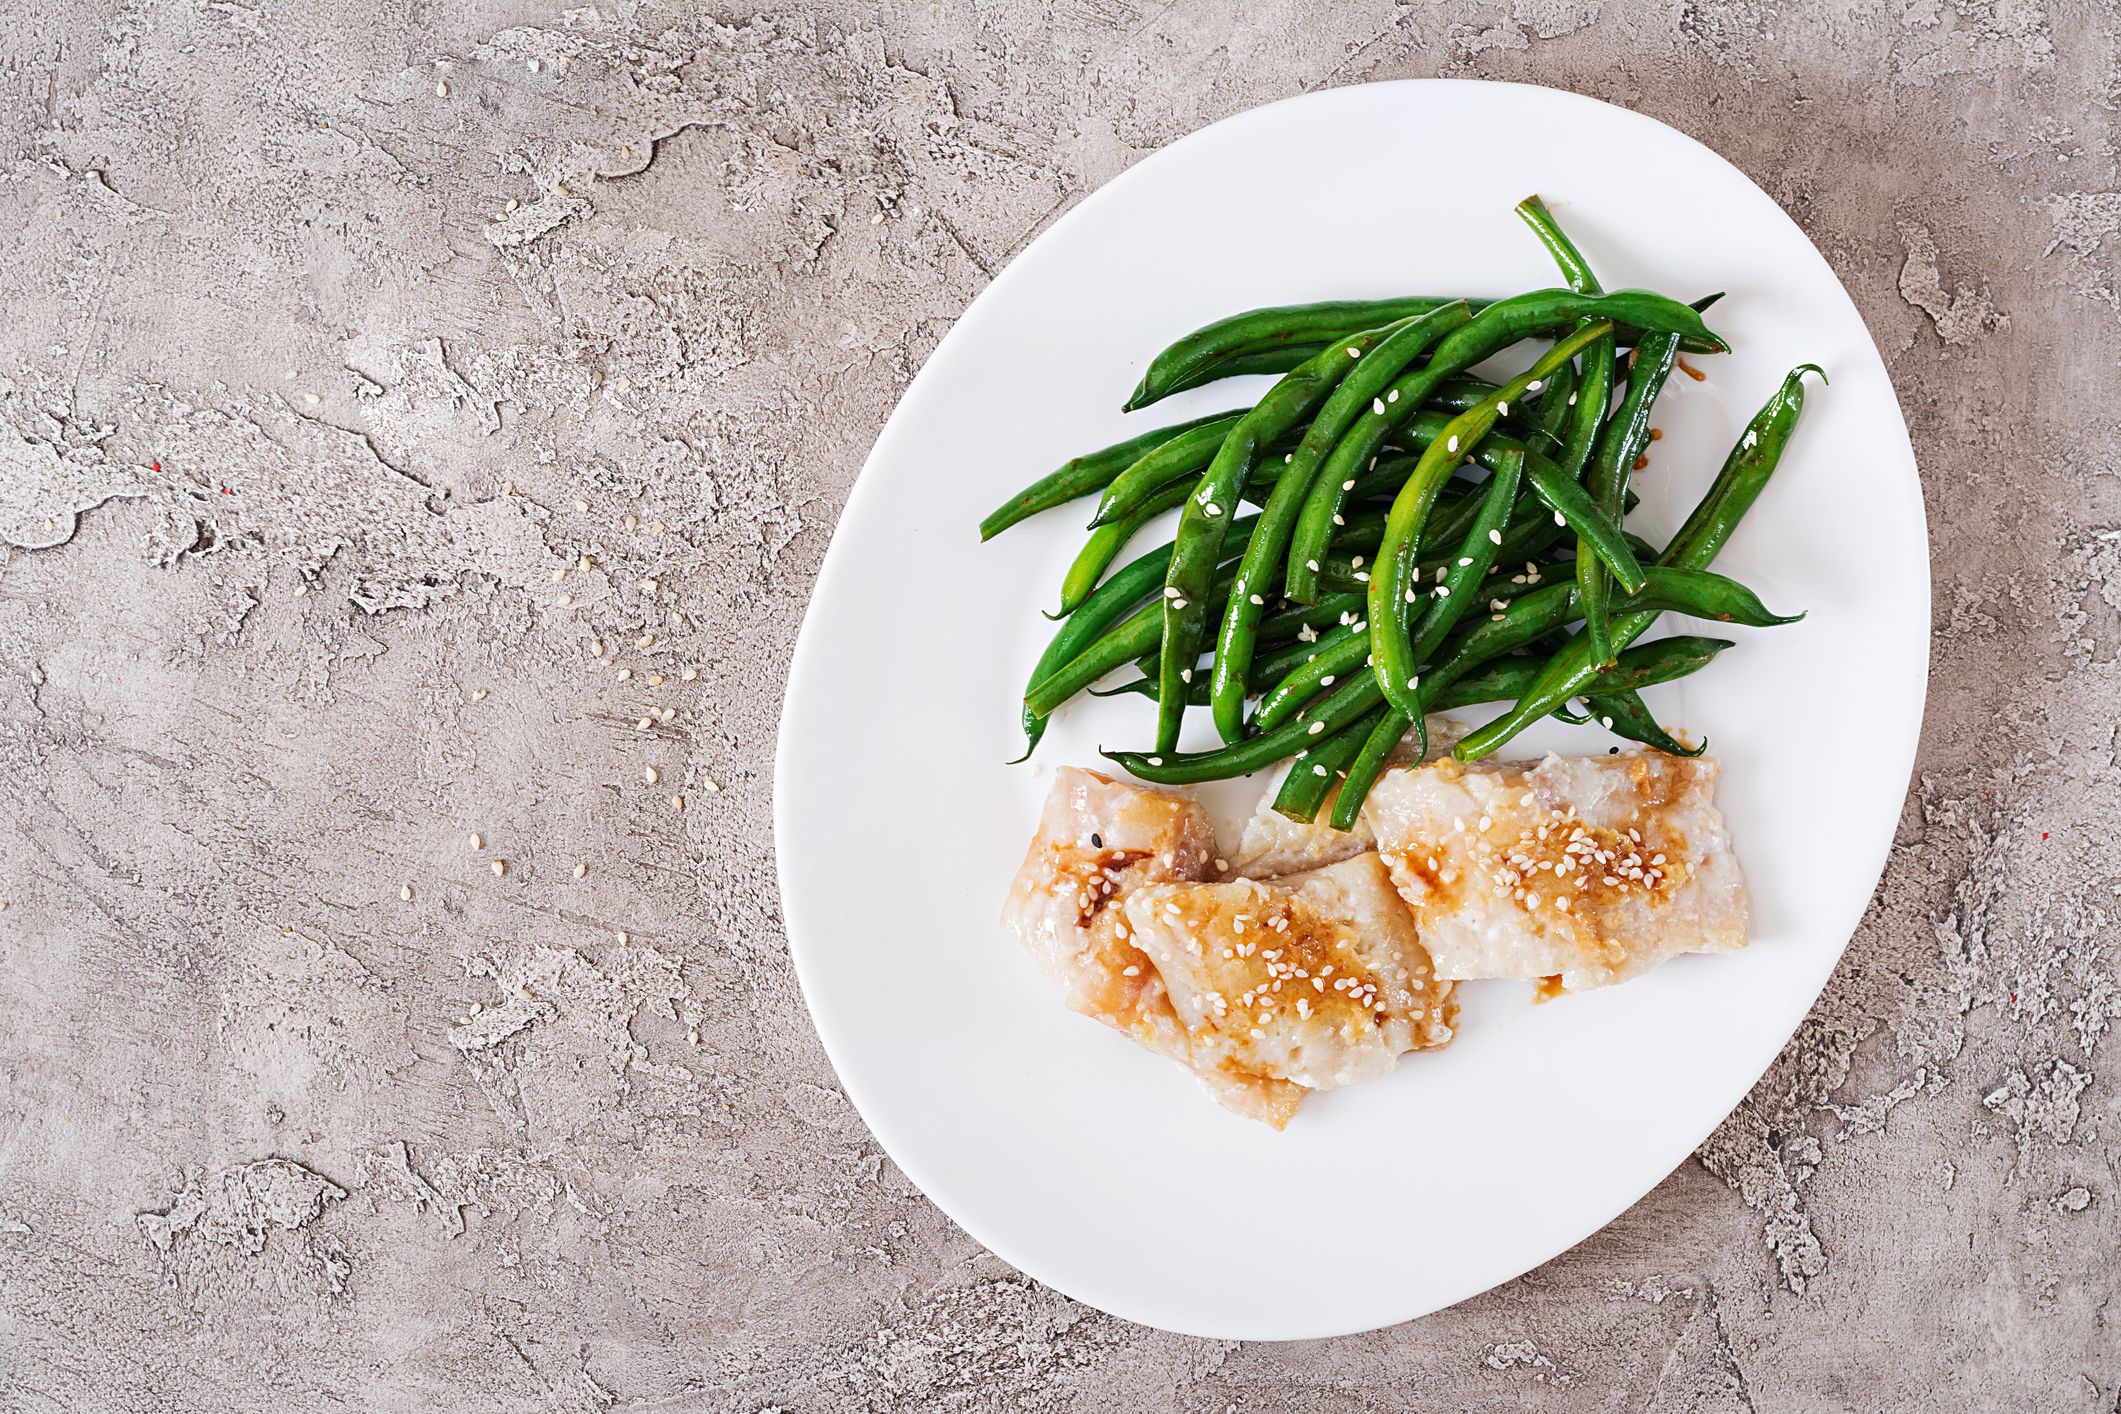 https://hips.hearstapps.com/hmg-prod/images/fish-fillet-served-with-soy-sauce-and-green-beans-royalty-free-image-1598389568.jpg